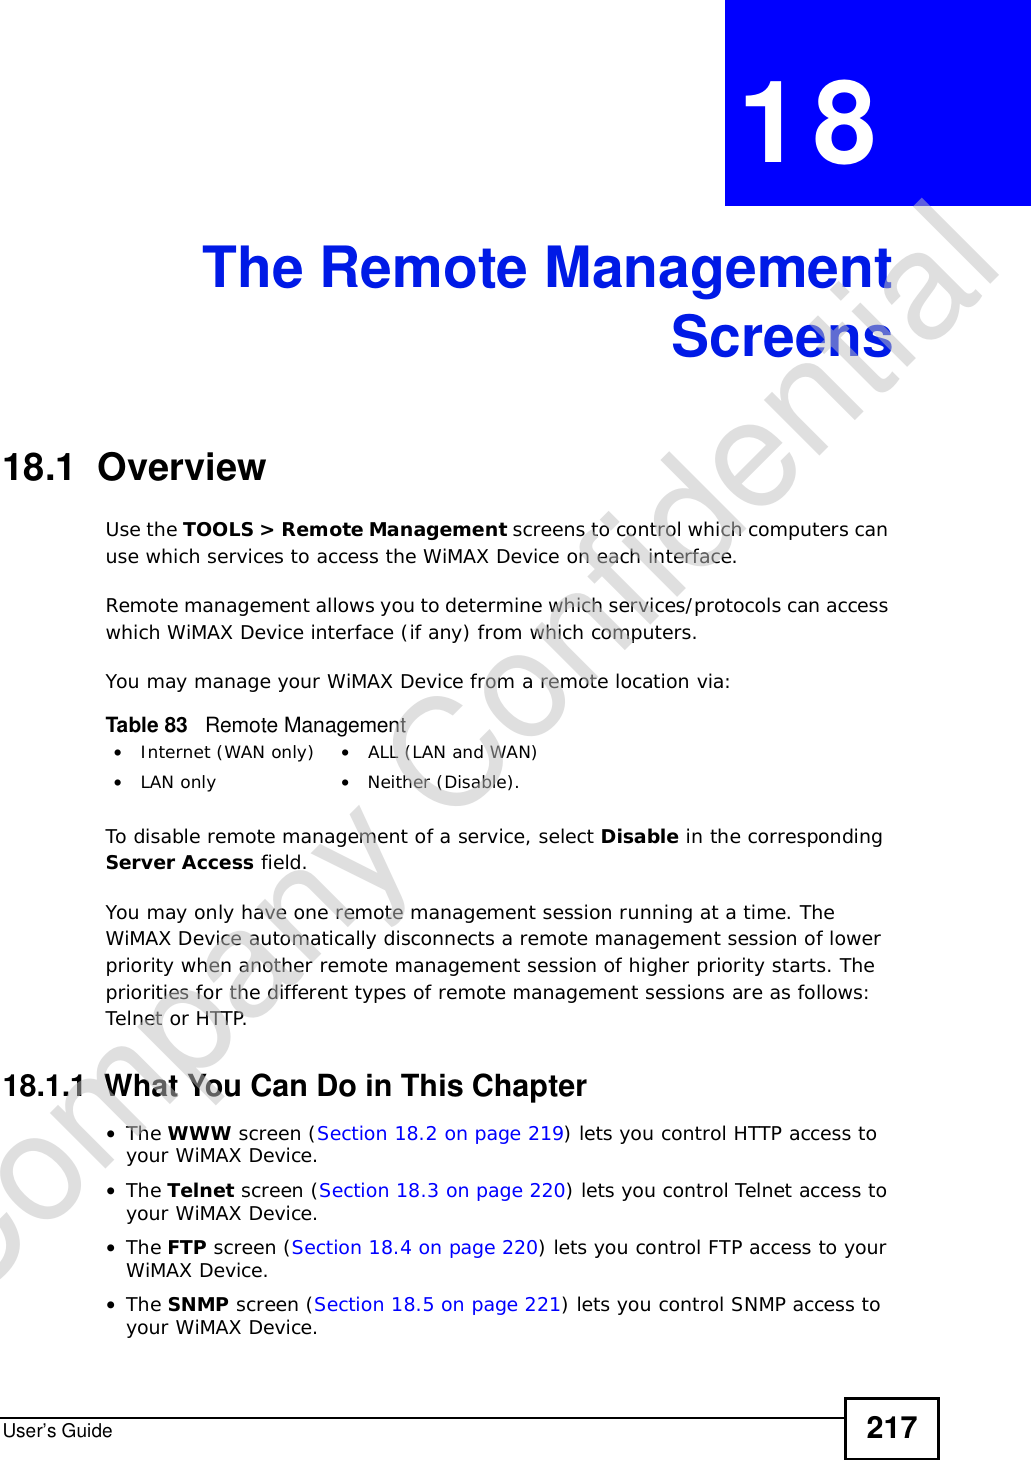 User’s Guide 217CHAPTER 18The Remote ManagementScreens18.1  OverviewUse the TOOLS &gt; Remote Management screens to control which computers can use which services to access the WiMAX Device on each interface.Remote management allows you to determine which services/protocols can access which WiMAX Device interface (if any) from which computers.You may manage your WiMAX Device from a remote location via:To disable remote management of a service, select Disable in the corresponding Server Access field.You may only have one remote management session running at a time. The WiMAX Device automatically disconnects a remote management session of lower priority when another remote management session of higher priority starts. The priorities for the different types of remote management sessions are as follows: Telnet or HTTP.18.1.1  What You Can Do in This Chapter•The WWW screen (Section 18.2 on page 219) lets you control HTTP access to your WiMAX Device.•The Telnet screen (Section 18.3 on page 220) lets you control Telnet access to your WiMAX Device.•The FTP screen (Section 18.4 on page 220) lets you control FTP access to your WiMAX Device.•The SNMP screen (Section 18.5 on page 221) lets you control SNMP access to your WiMAX Device.Table 83   Remote Management•Internet (WAN only) •ALL (LAN and WAN)•LAN only •Neither (Disable).Company Confidential